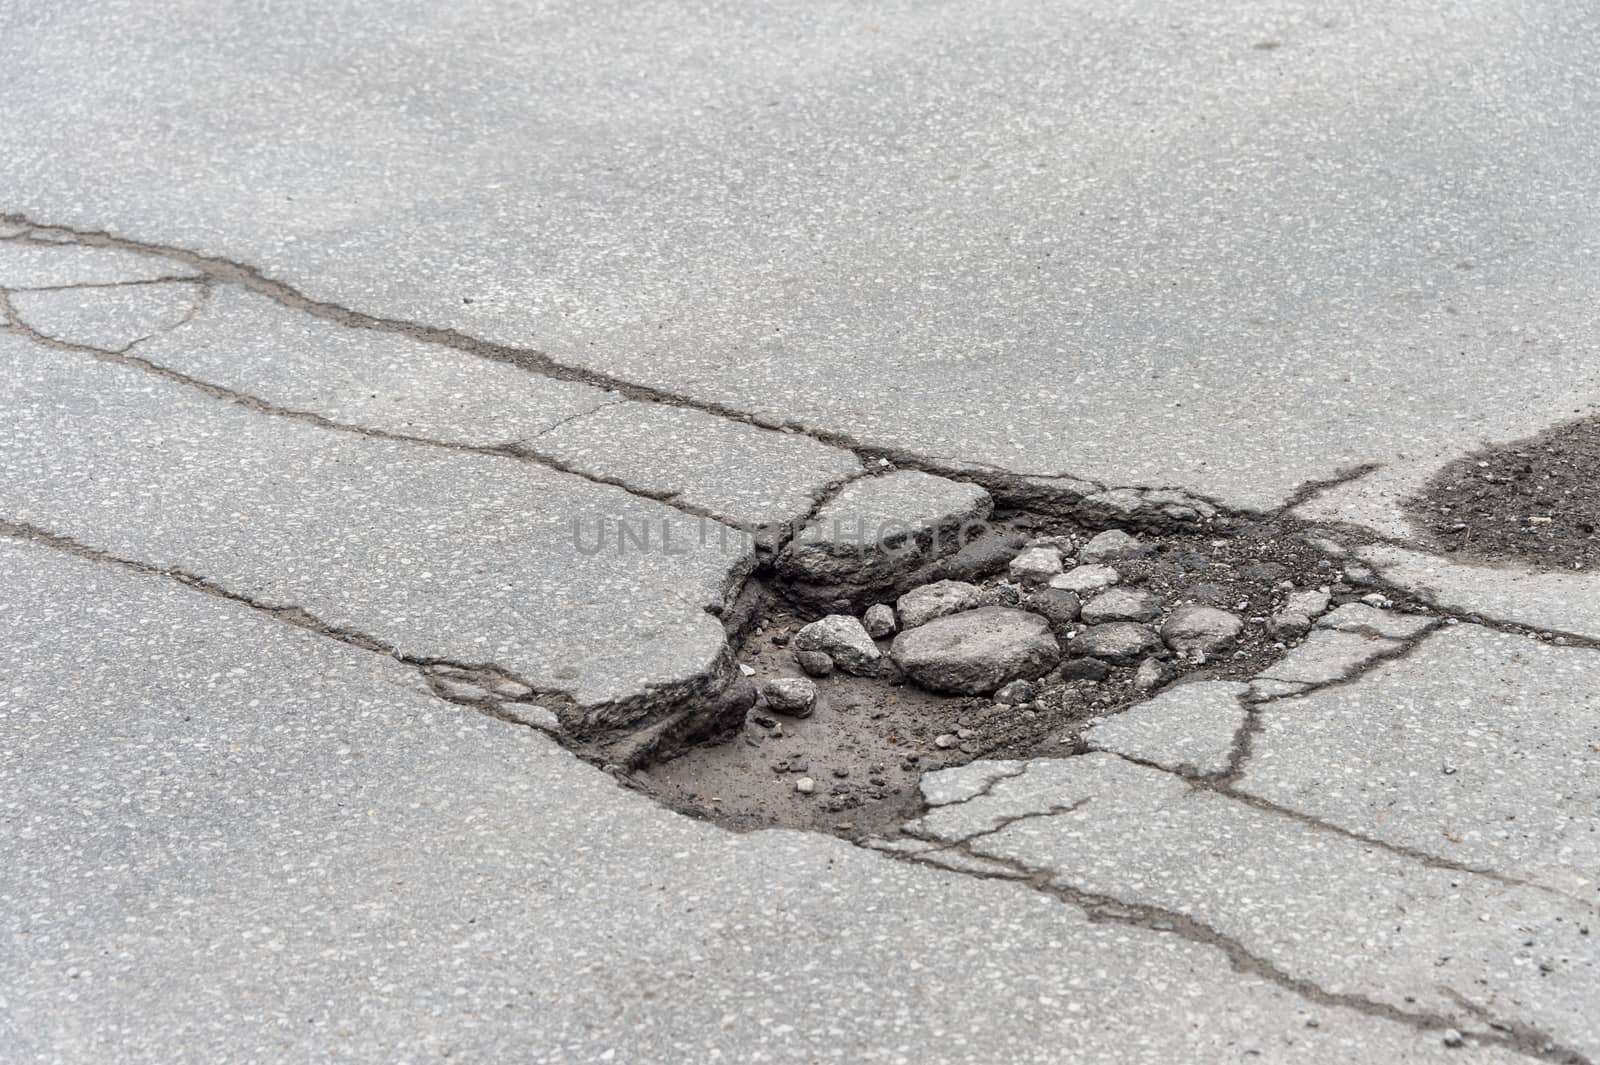 Large pothole in Montreal (2018) by mbruxelle